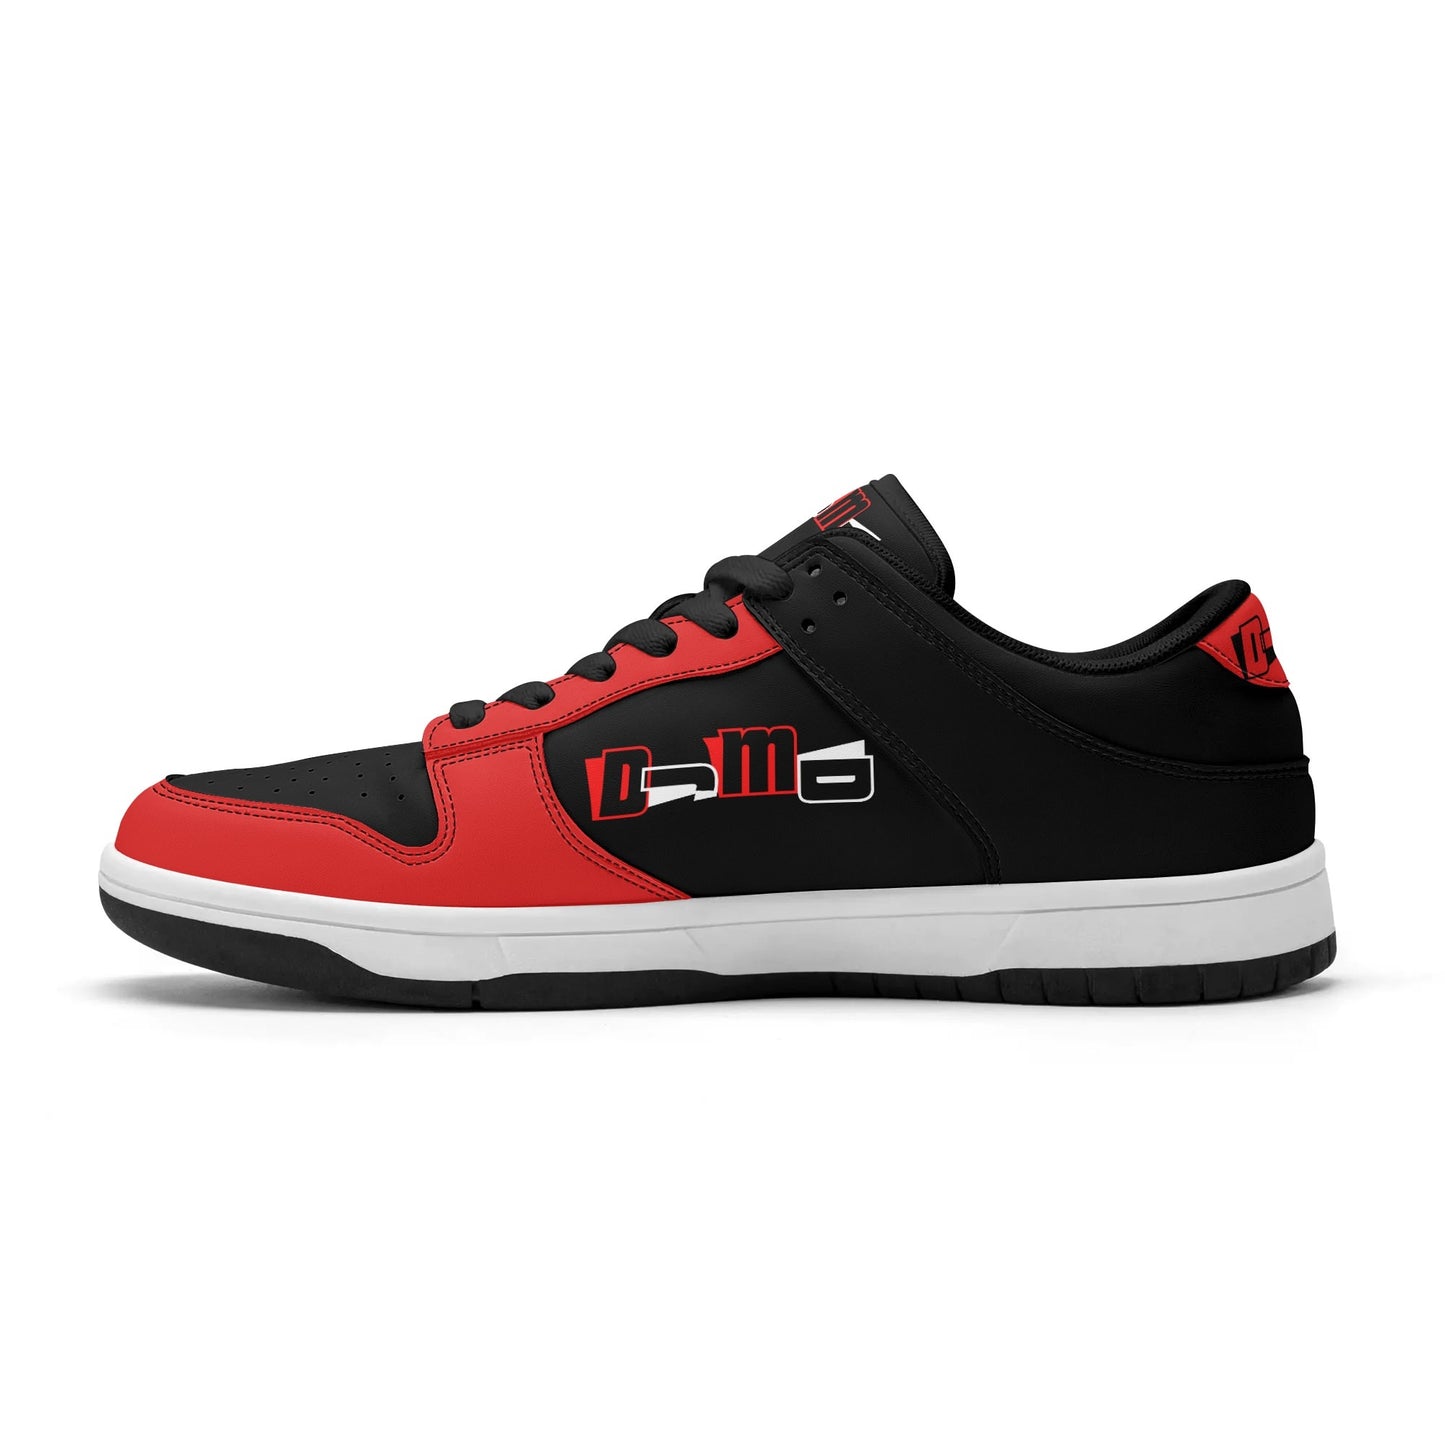 Dnt Juge My Different Mens Stylish Low Top Leather Sneakers